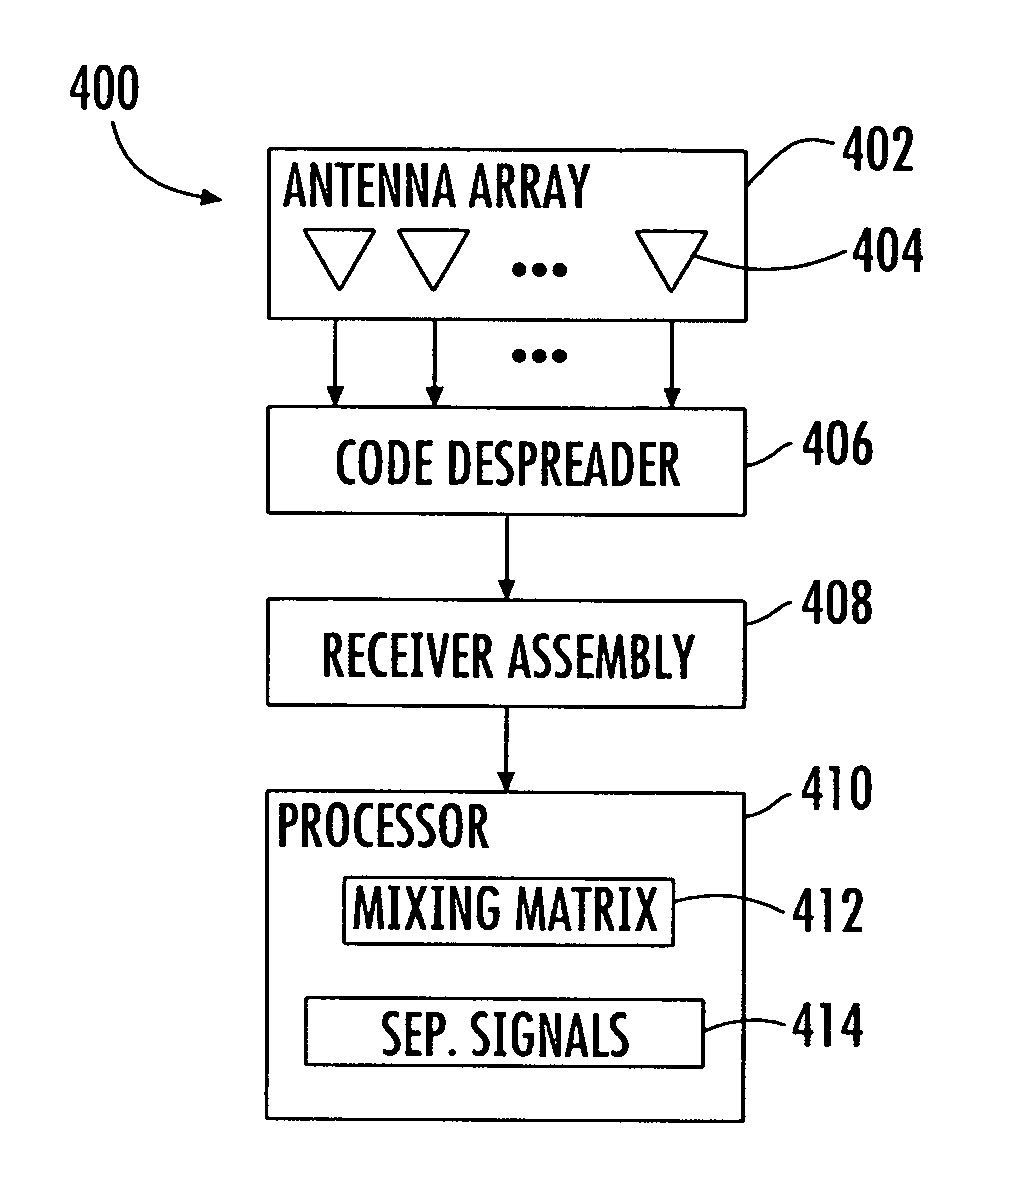 Blind signal separation using spreading codes